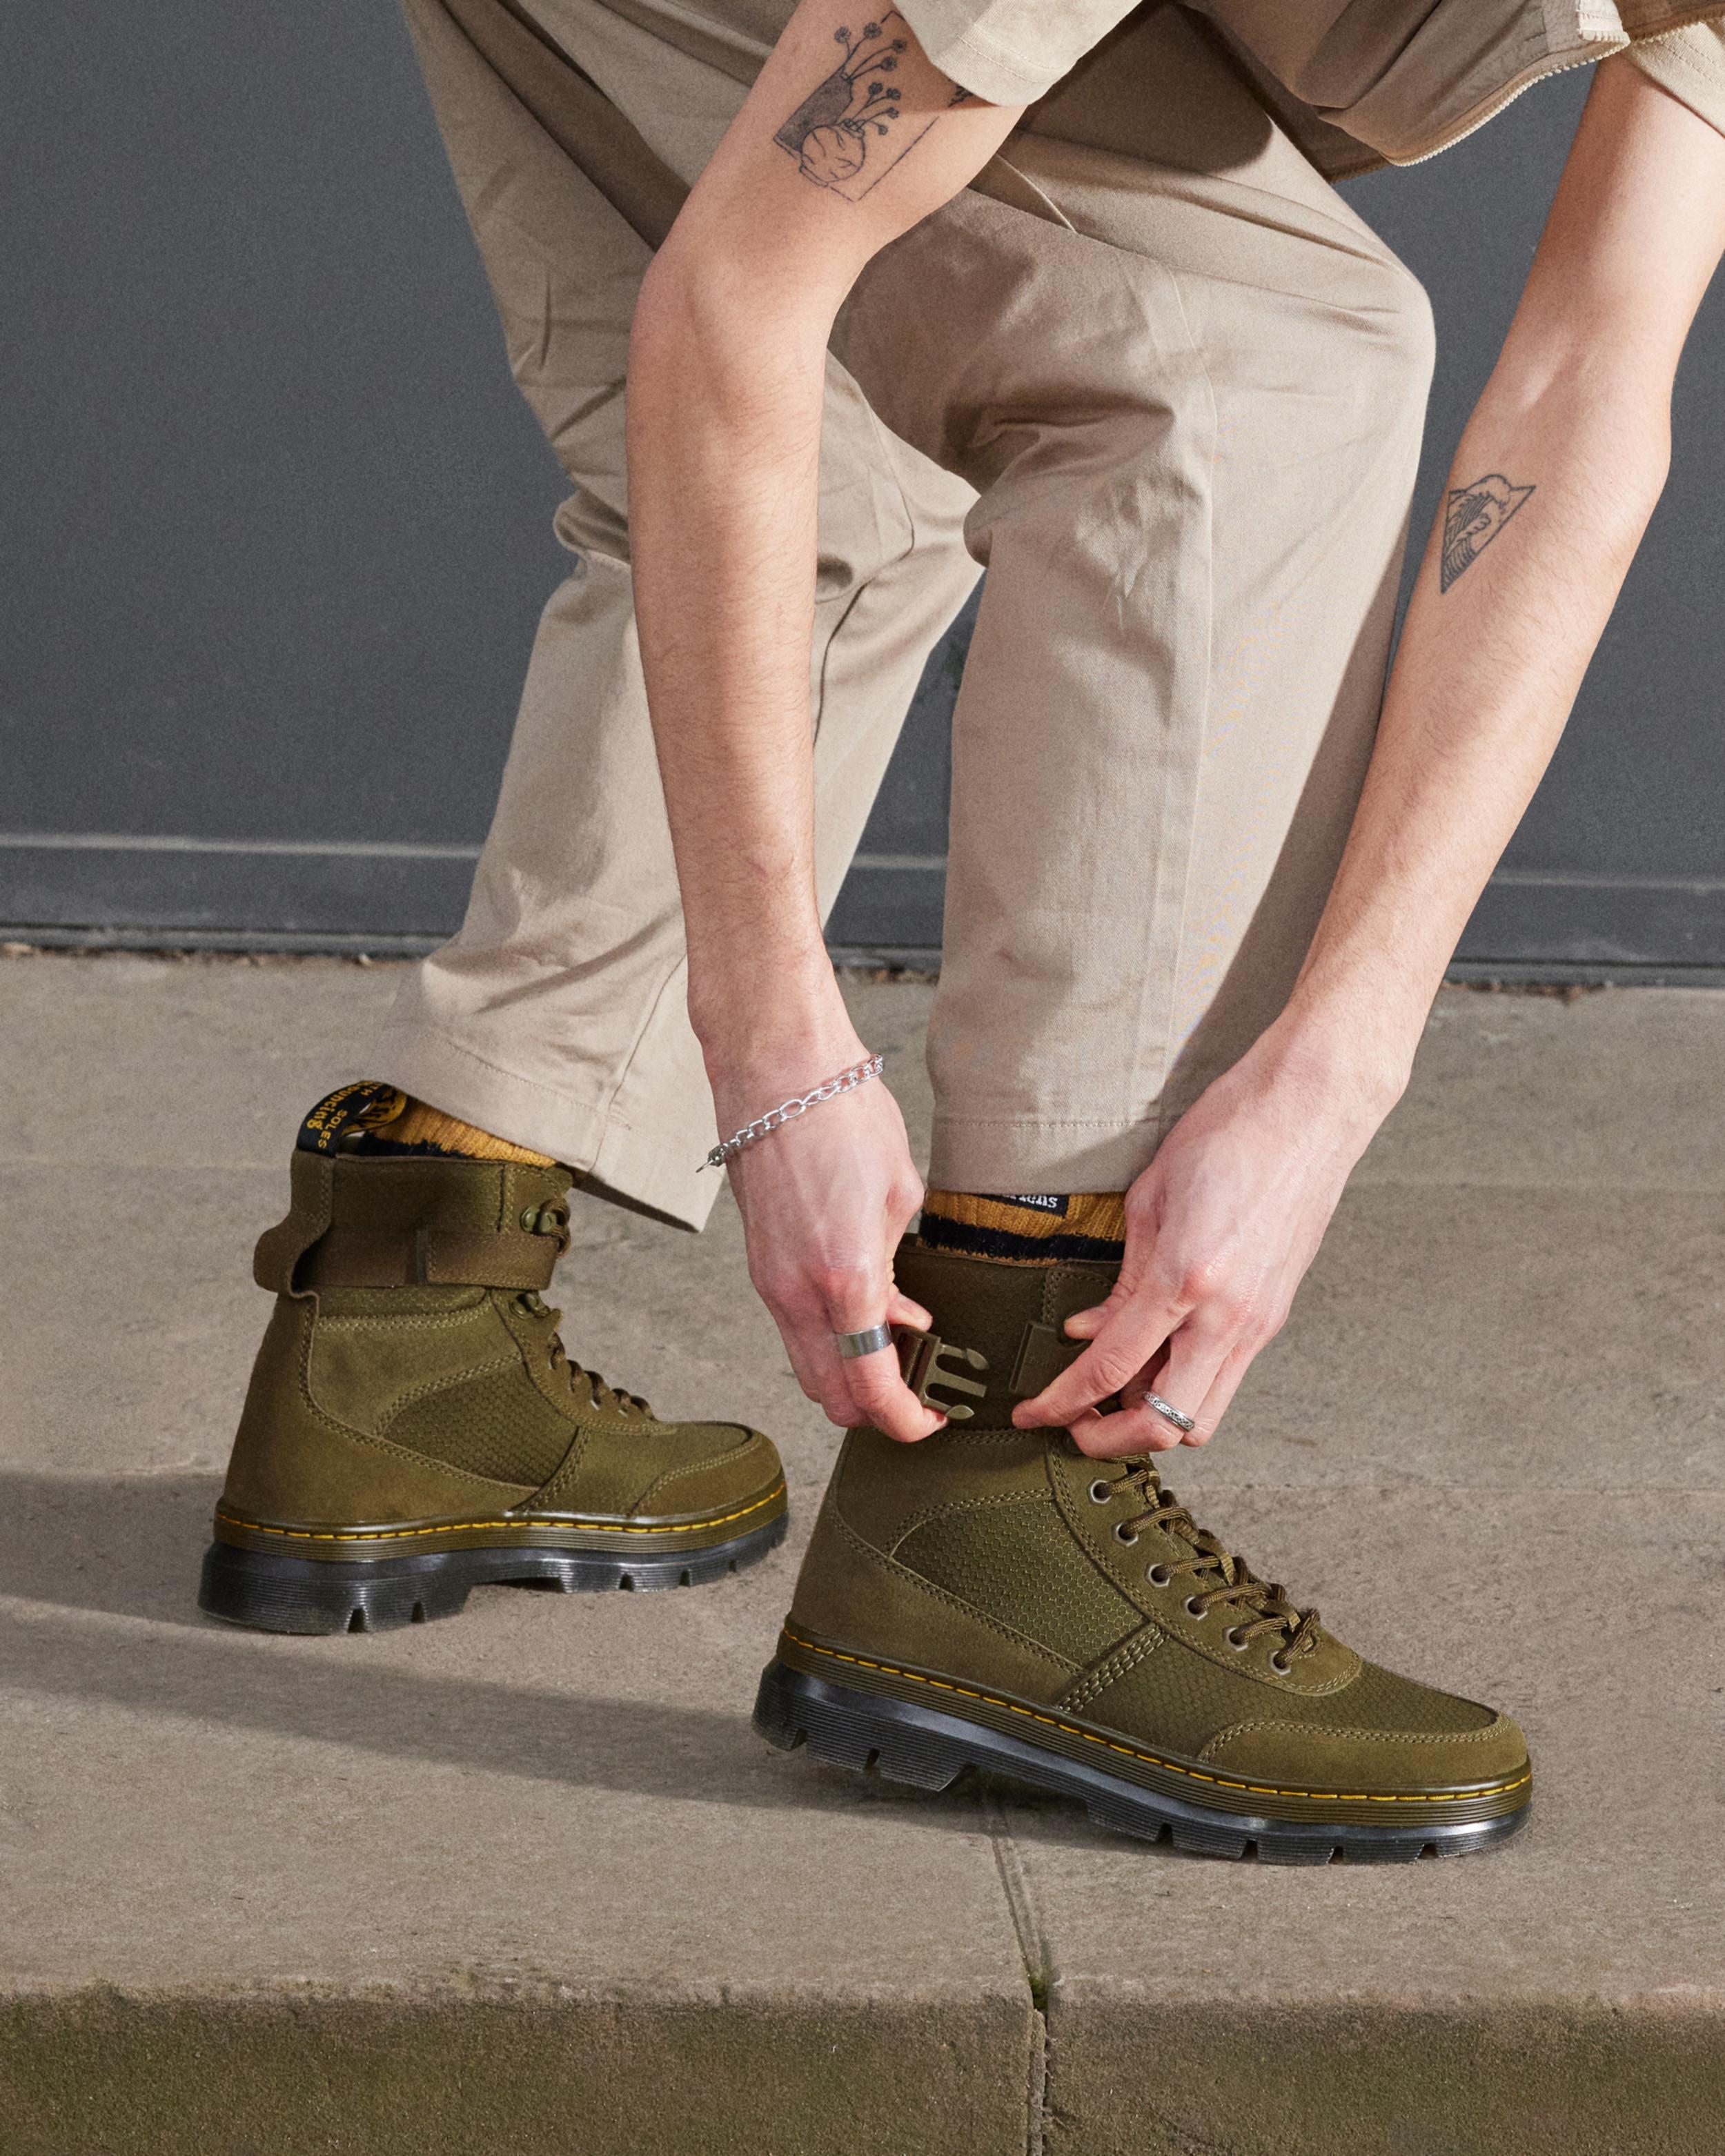 Combs Tech Suede & Nylon Utility BootsCombs Tech Suede & Nylon Utility Boots Dr. Martens